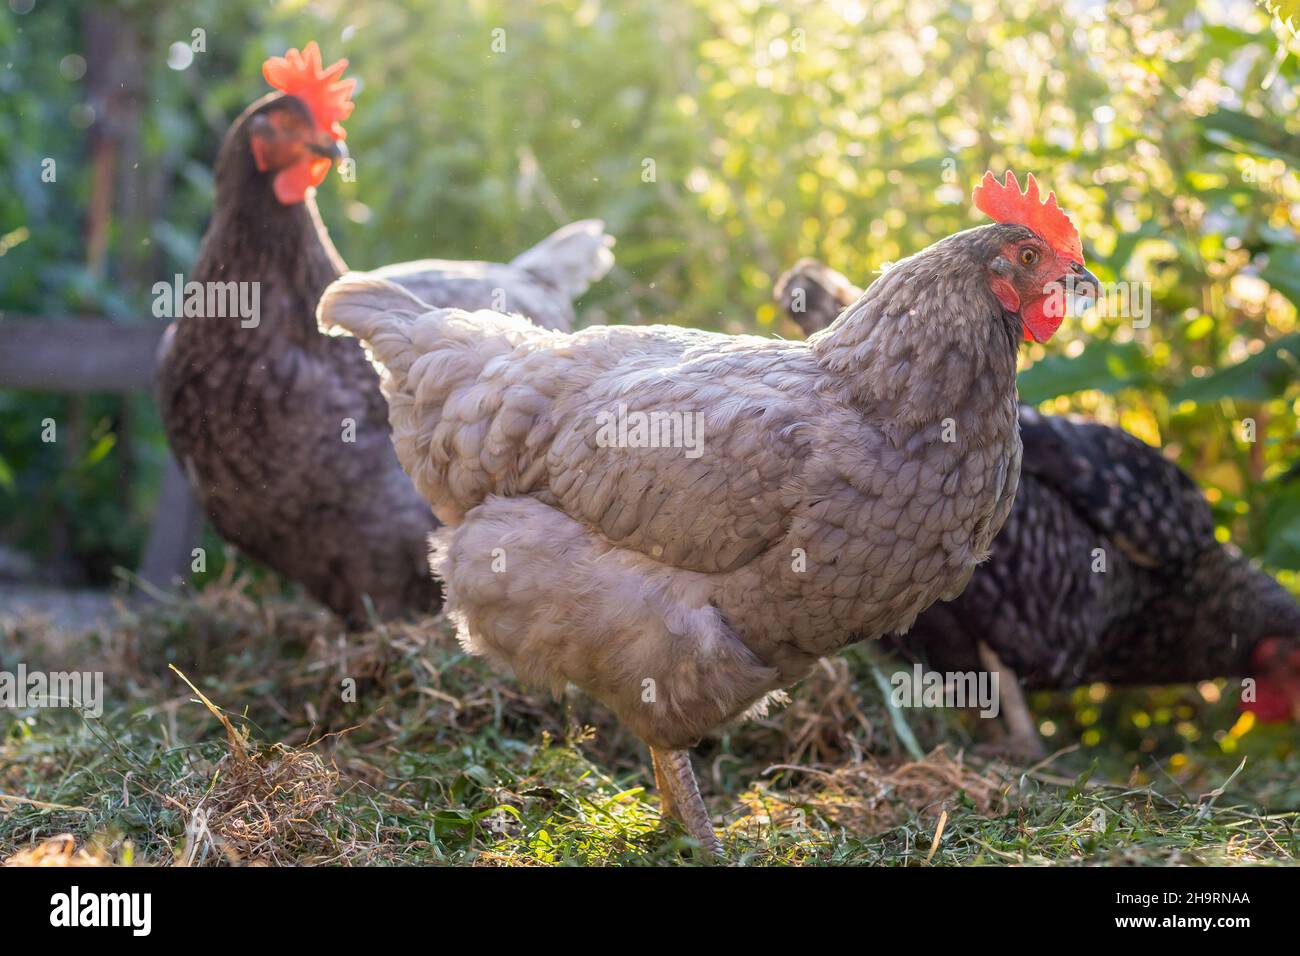 Free range Hens - blue and gray-colored hen in garden Stock Photo